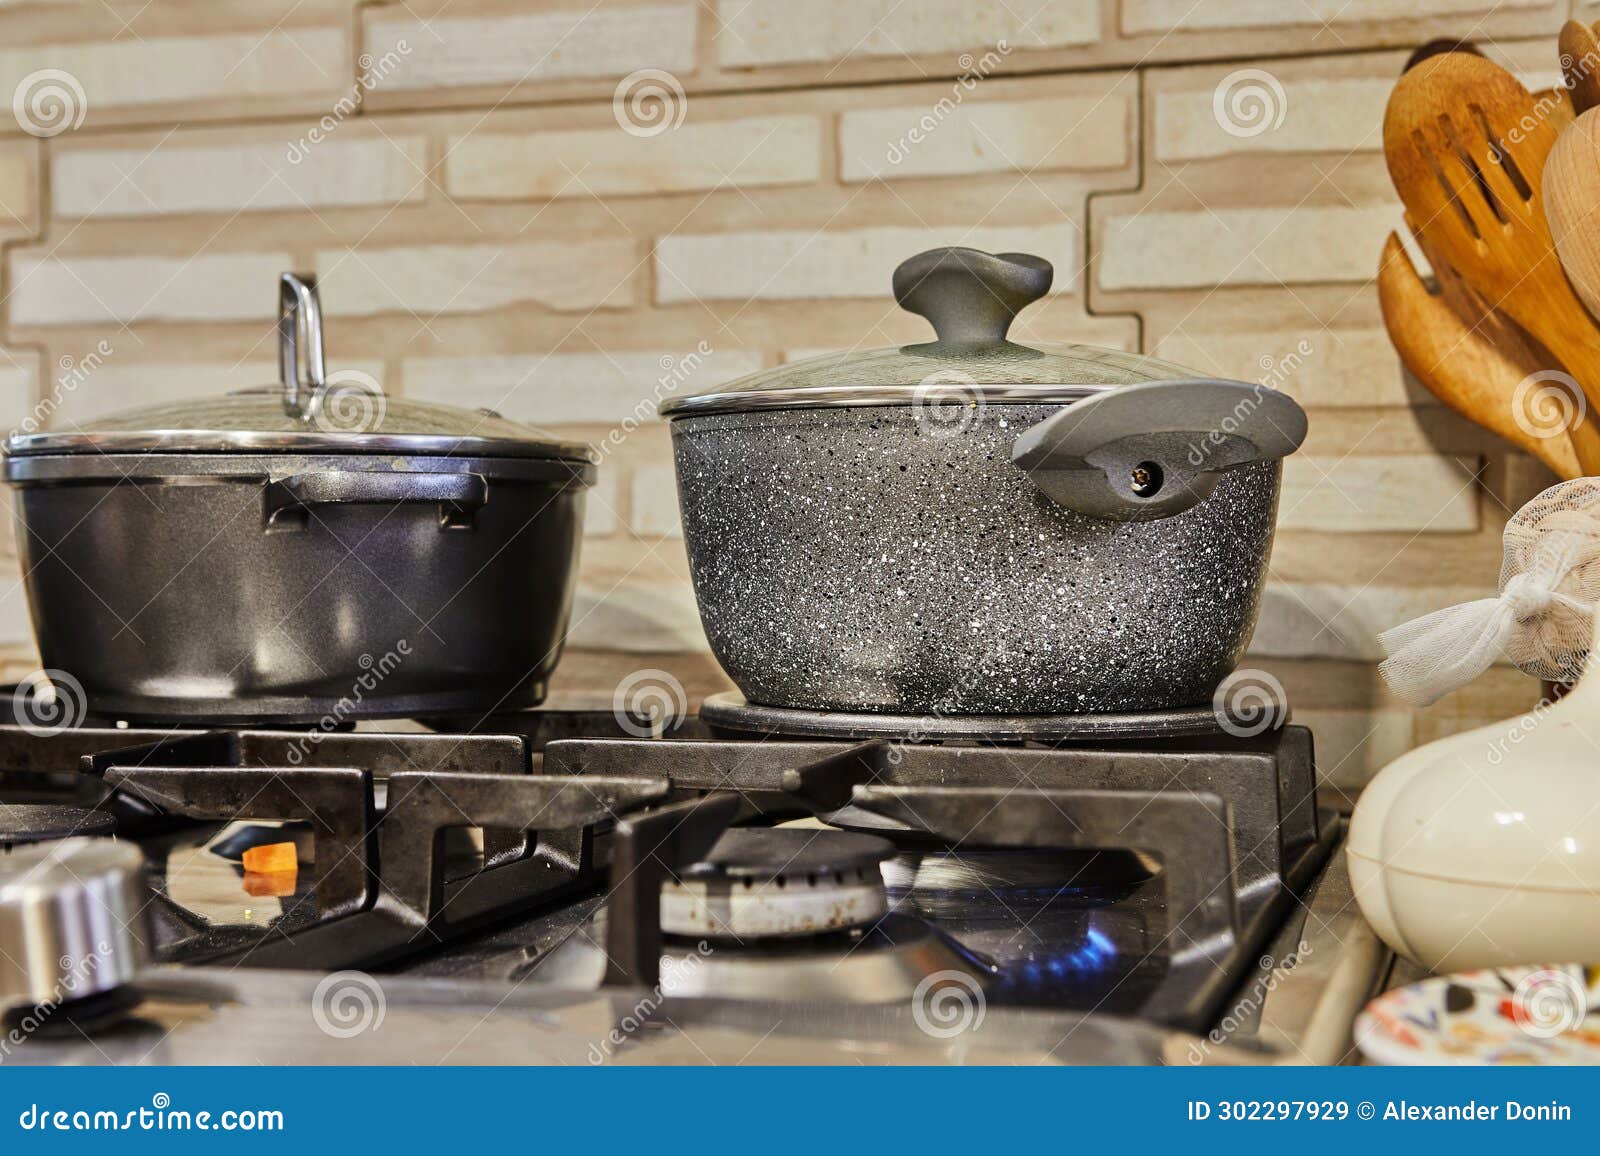 Busy Kitchen Scene with Pots, Lids, and Gas Stove Cooking Food at Home ...